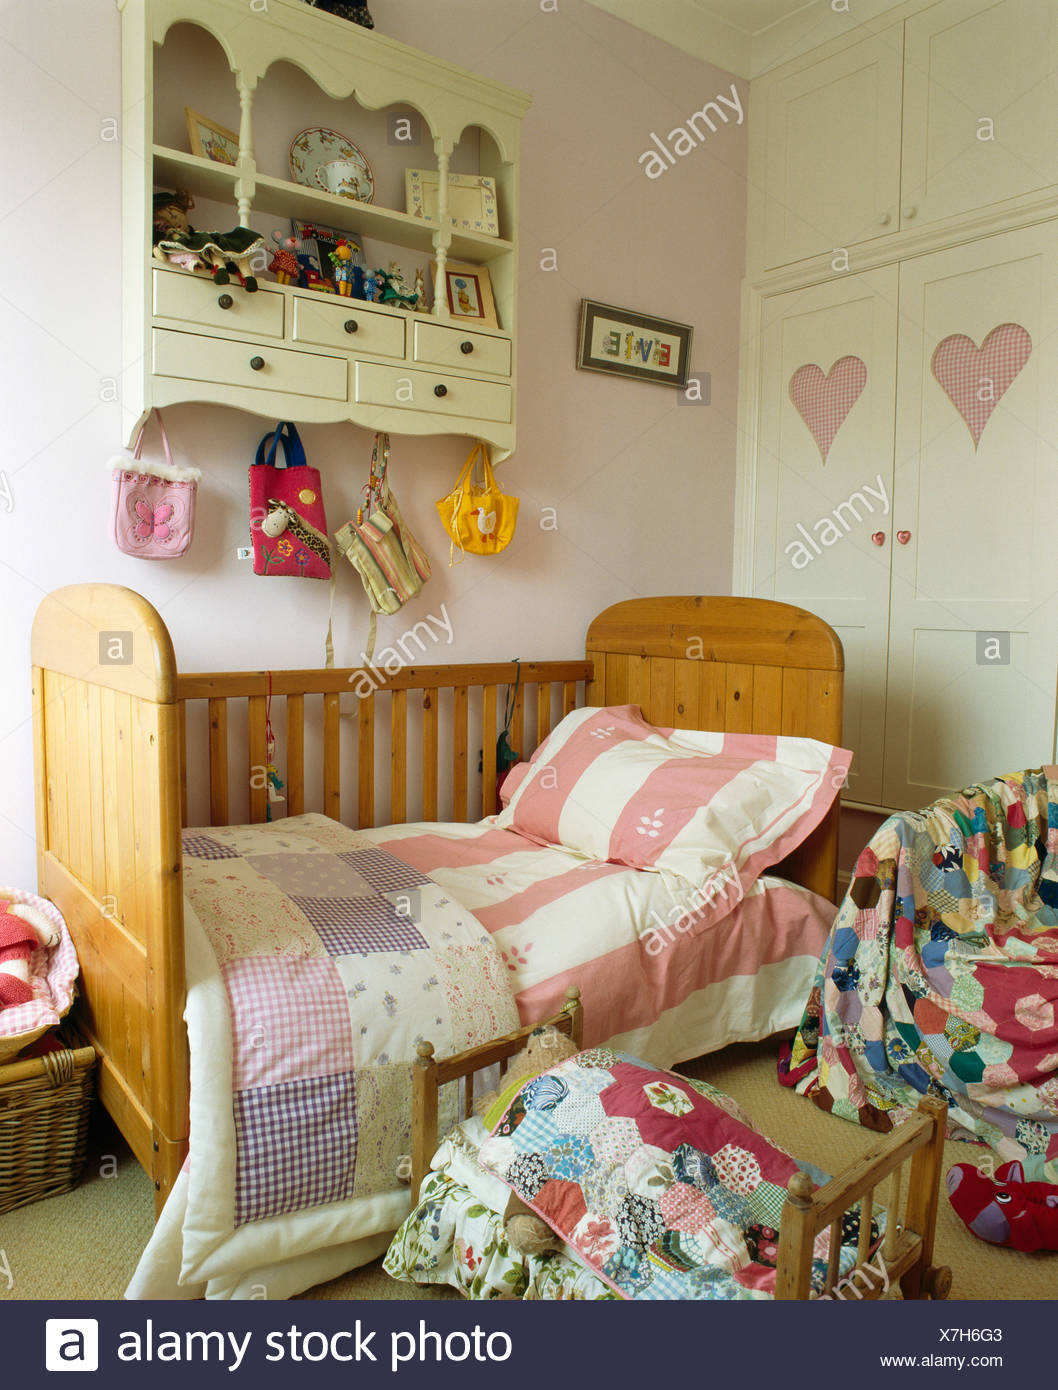 cot bed small